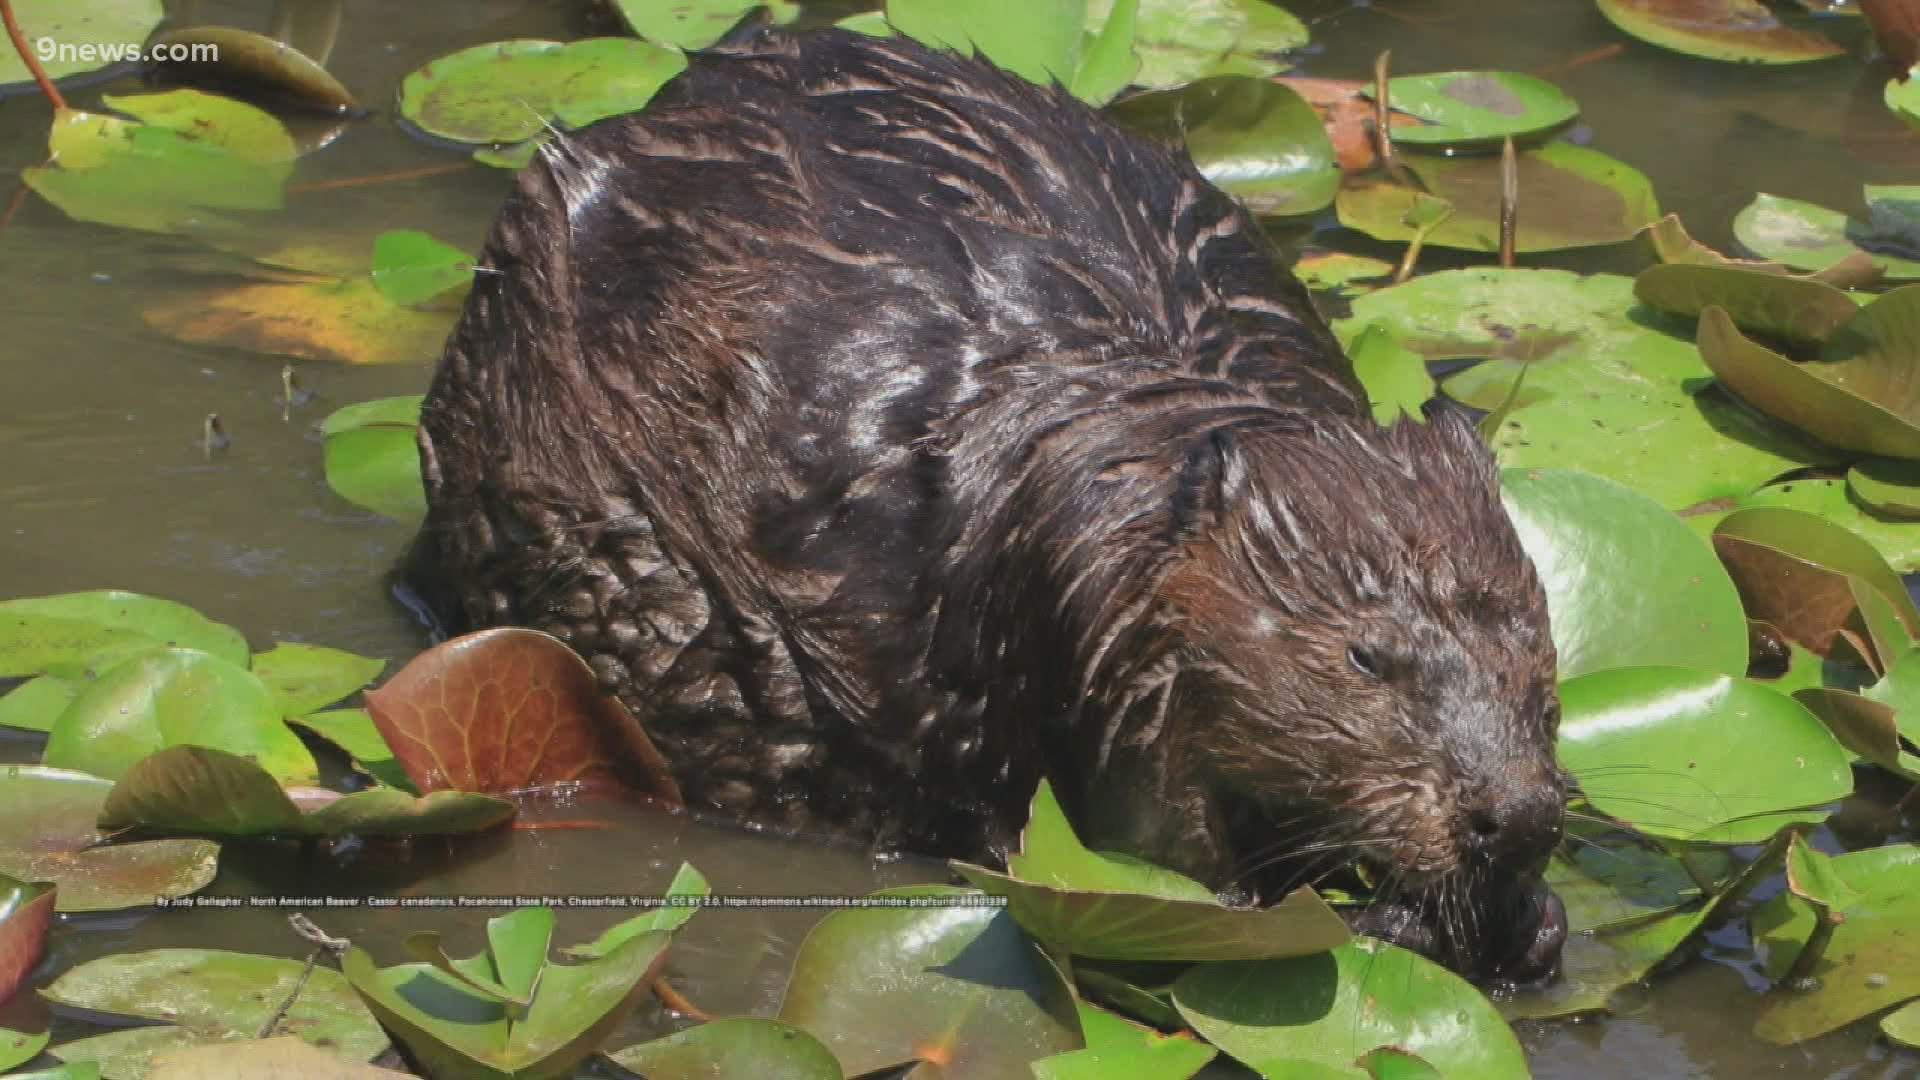 The North American beaver has dark brown waterproof fur, webbed feet and a long, paddle-shaped tail.